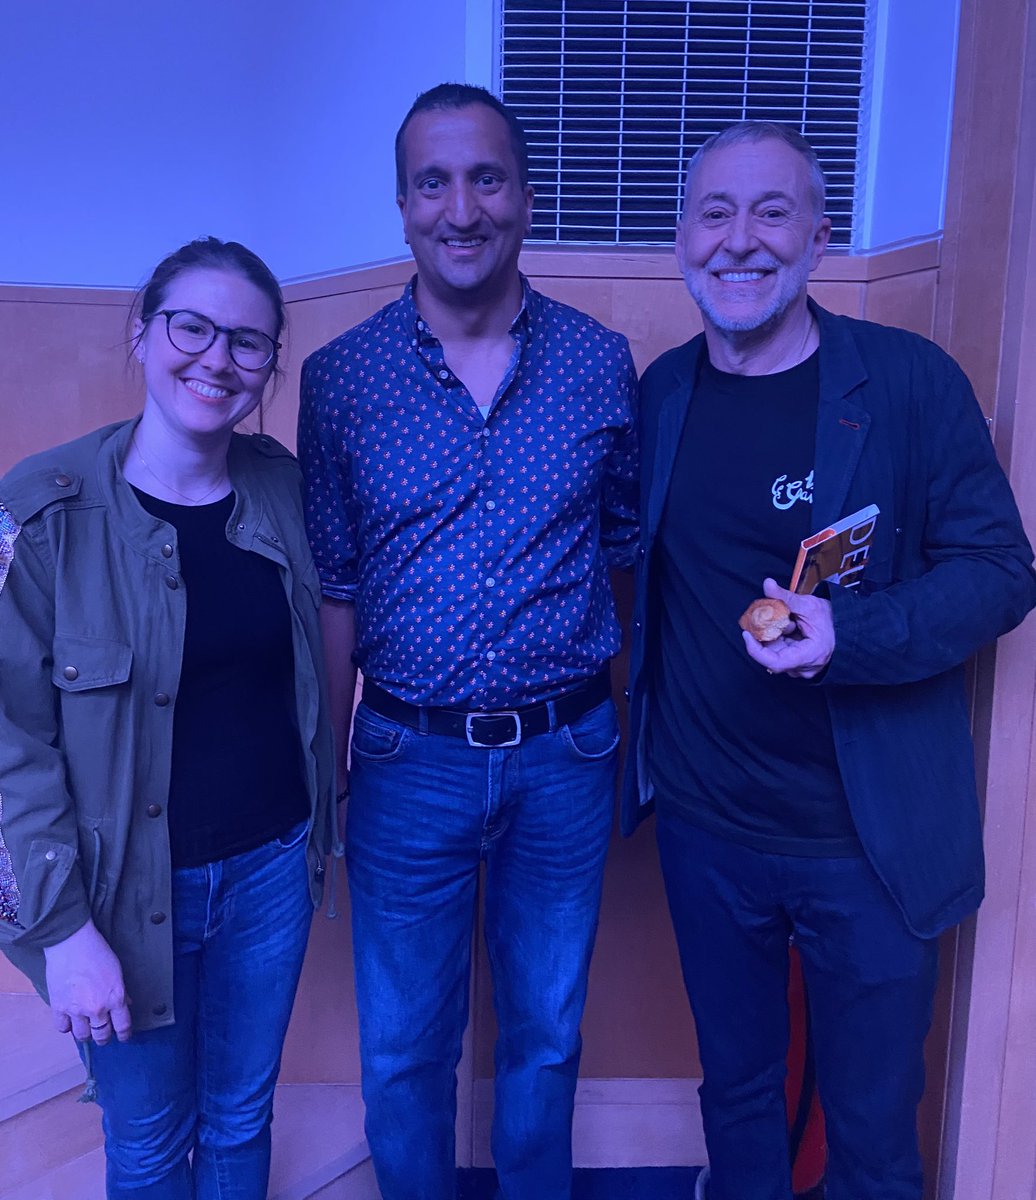 Was honoured to meet @michelrouxjr & Emily Roux last night @britishlibrary #Foodseason Launch. Thank you for the invite & organising another great event @PollyRussell1 @angela_clutton & team.